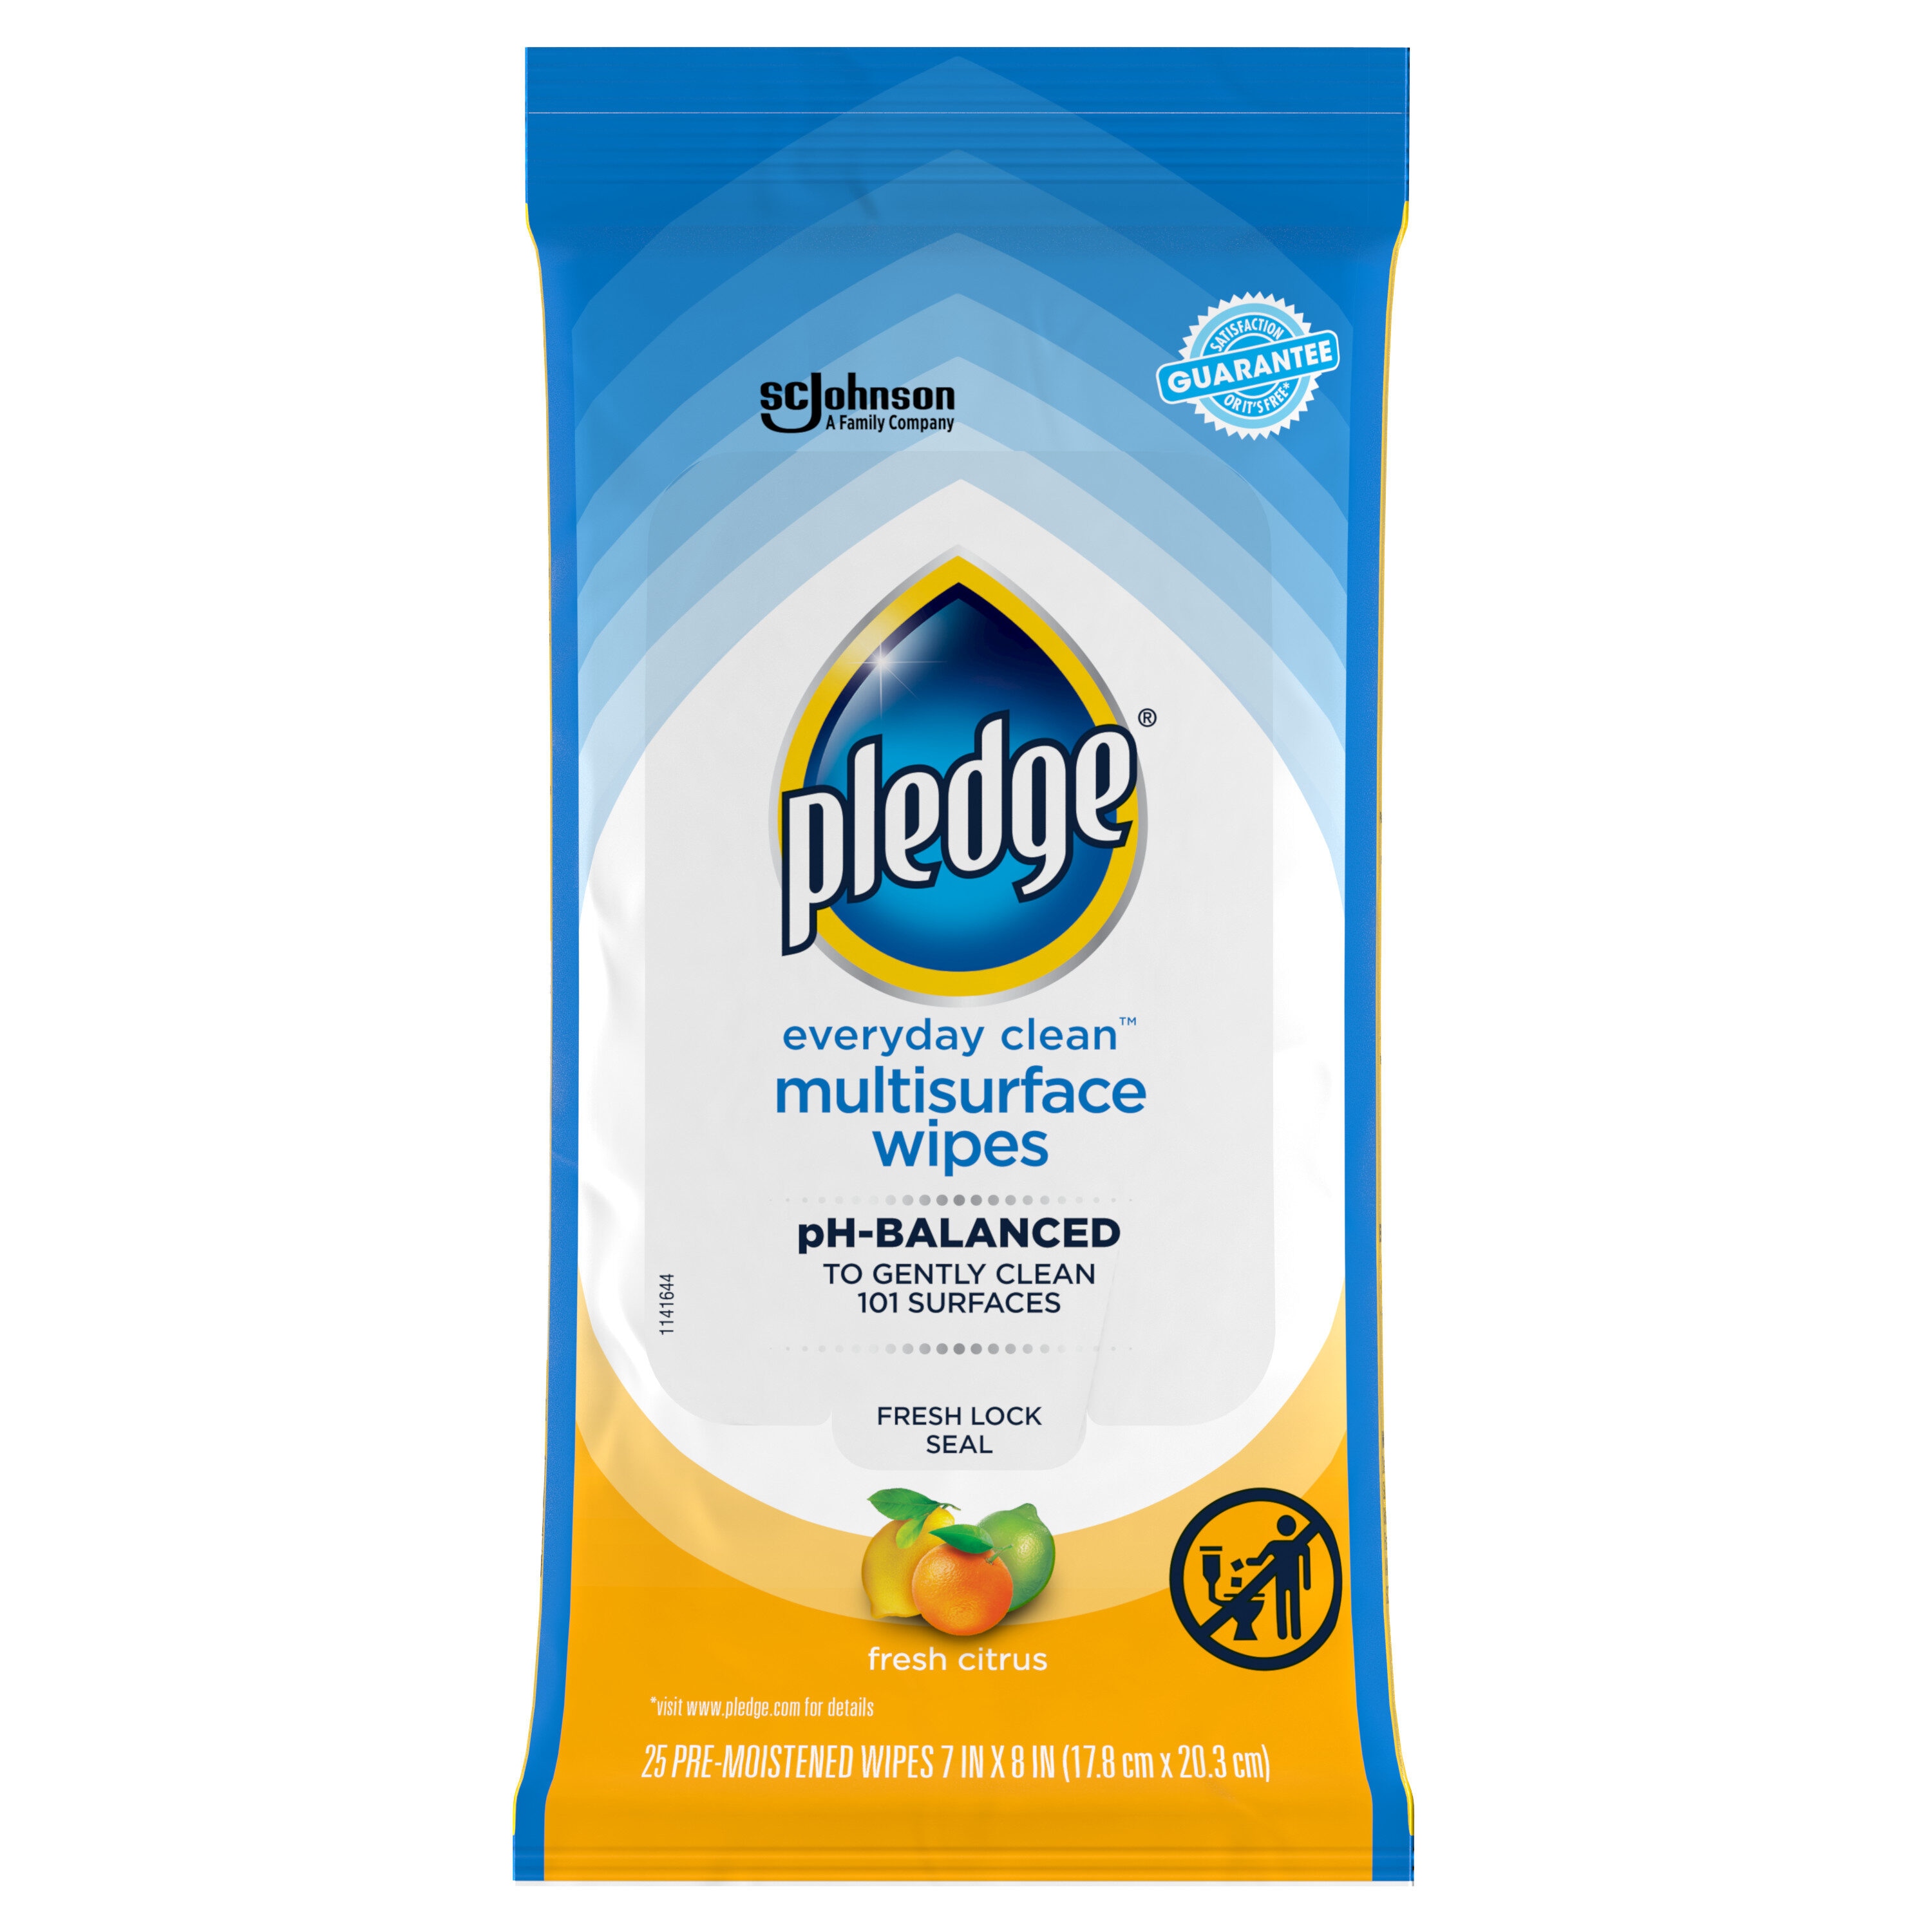 Shop Windex Glass Cleaner, Pledge Furniture and Multisurface Wipes Bundle  at